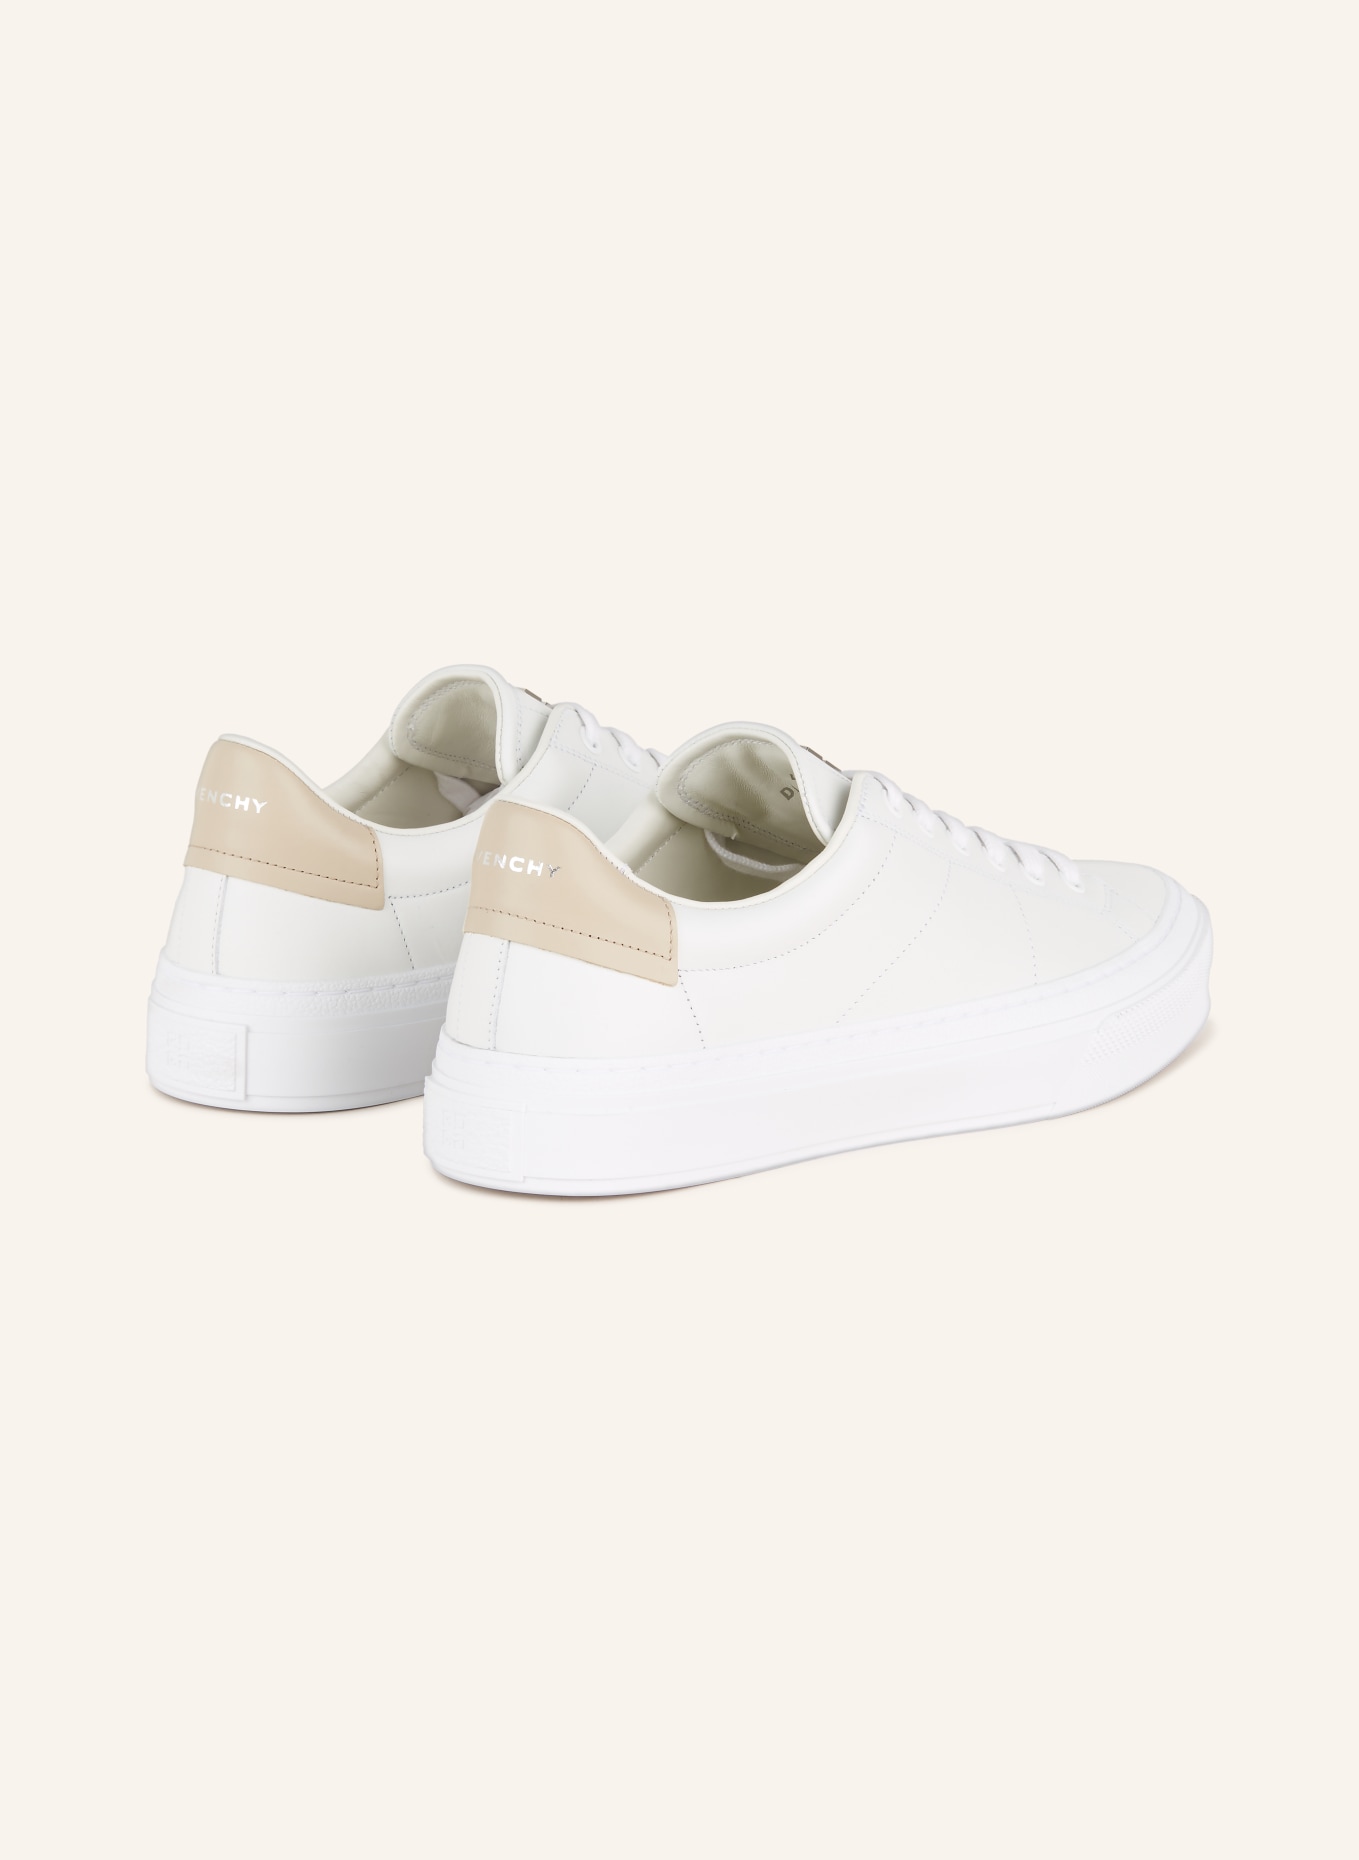 GIVENCHY Sneaker CITY , Farbe: WEISS/ BEIGE (Bild 2)